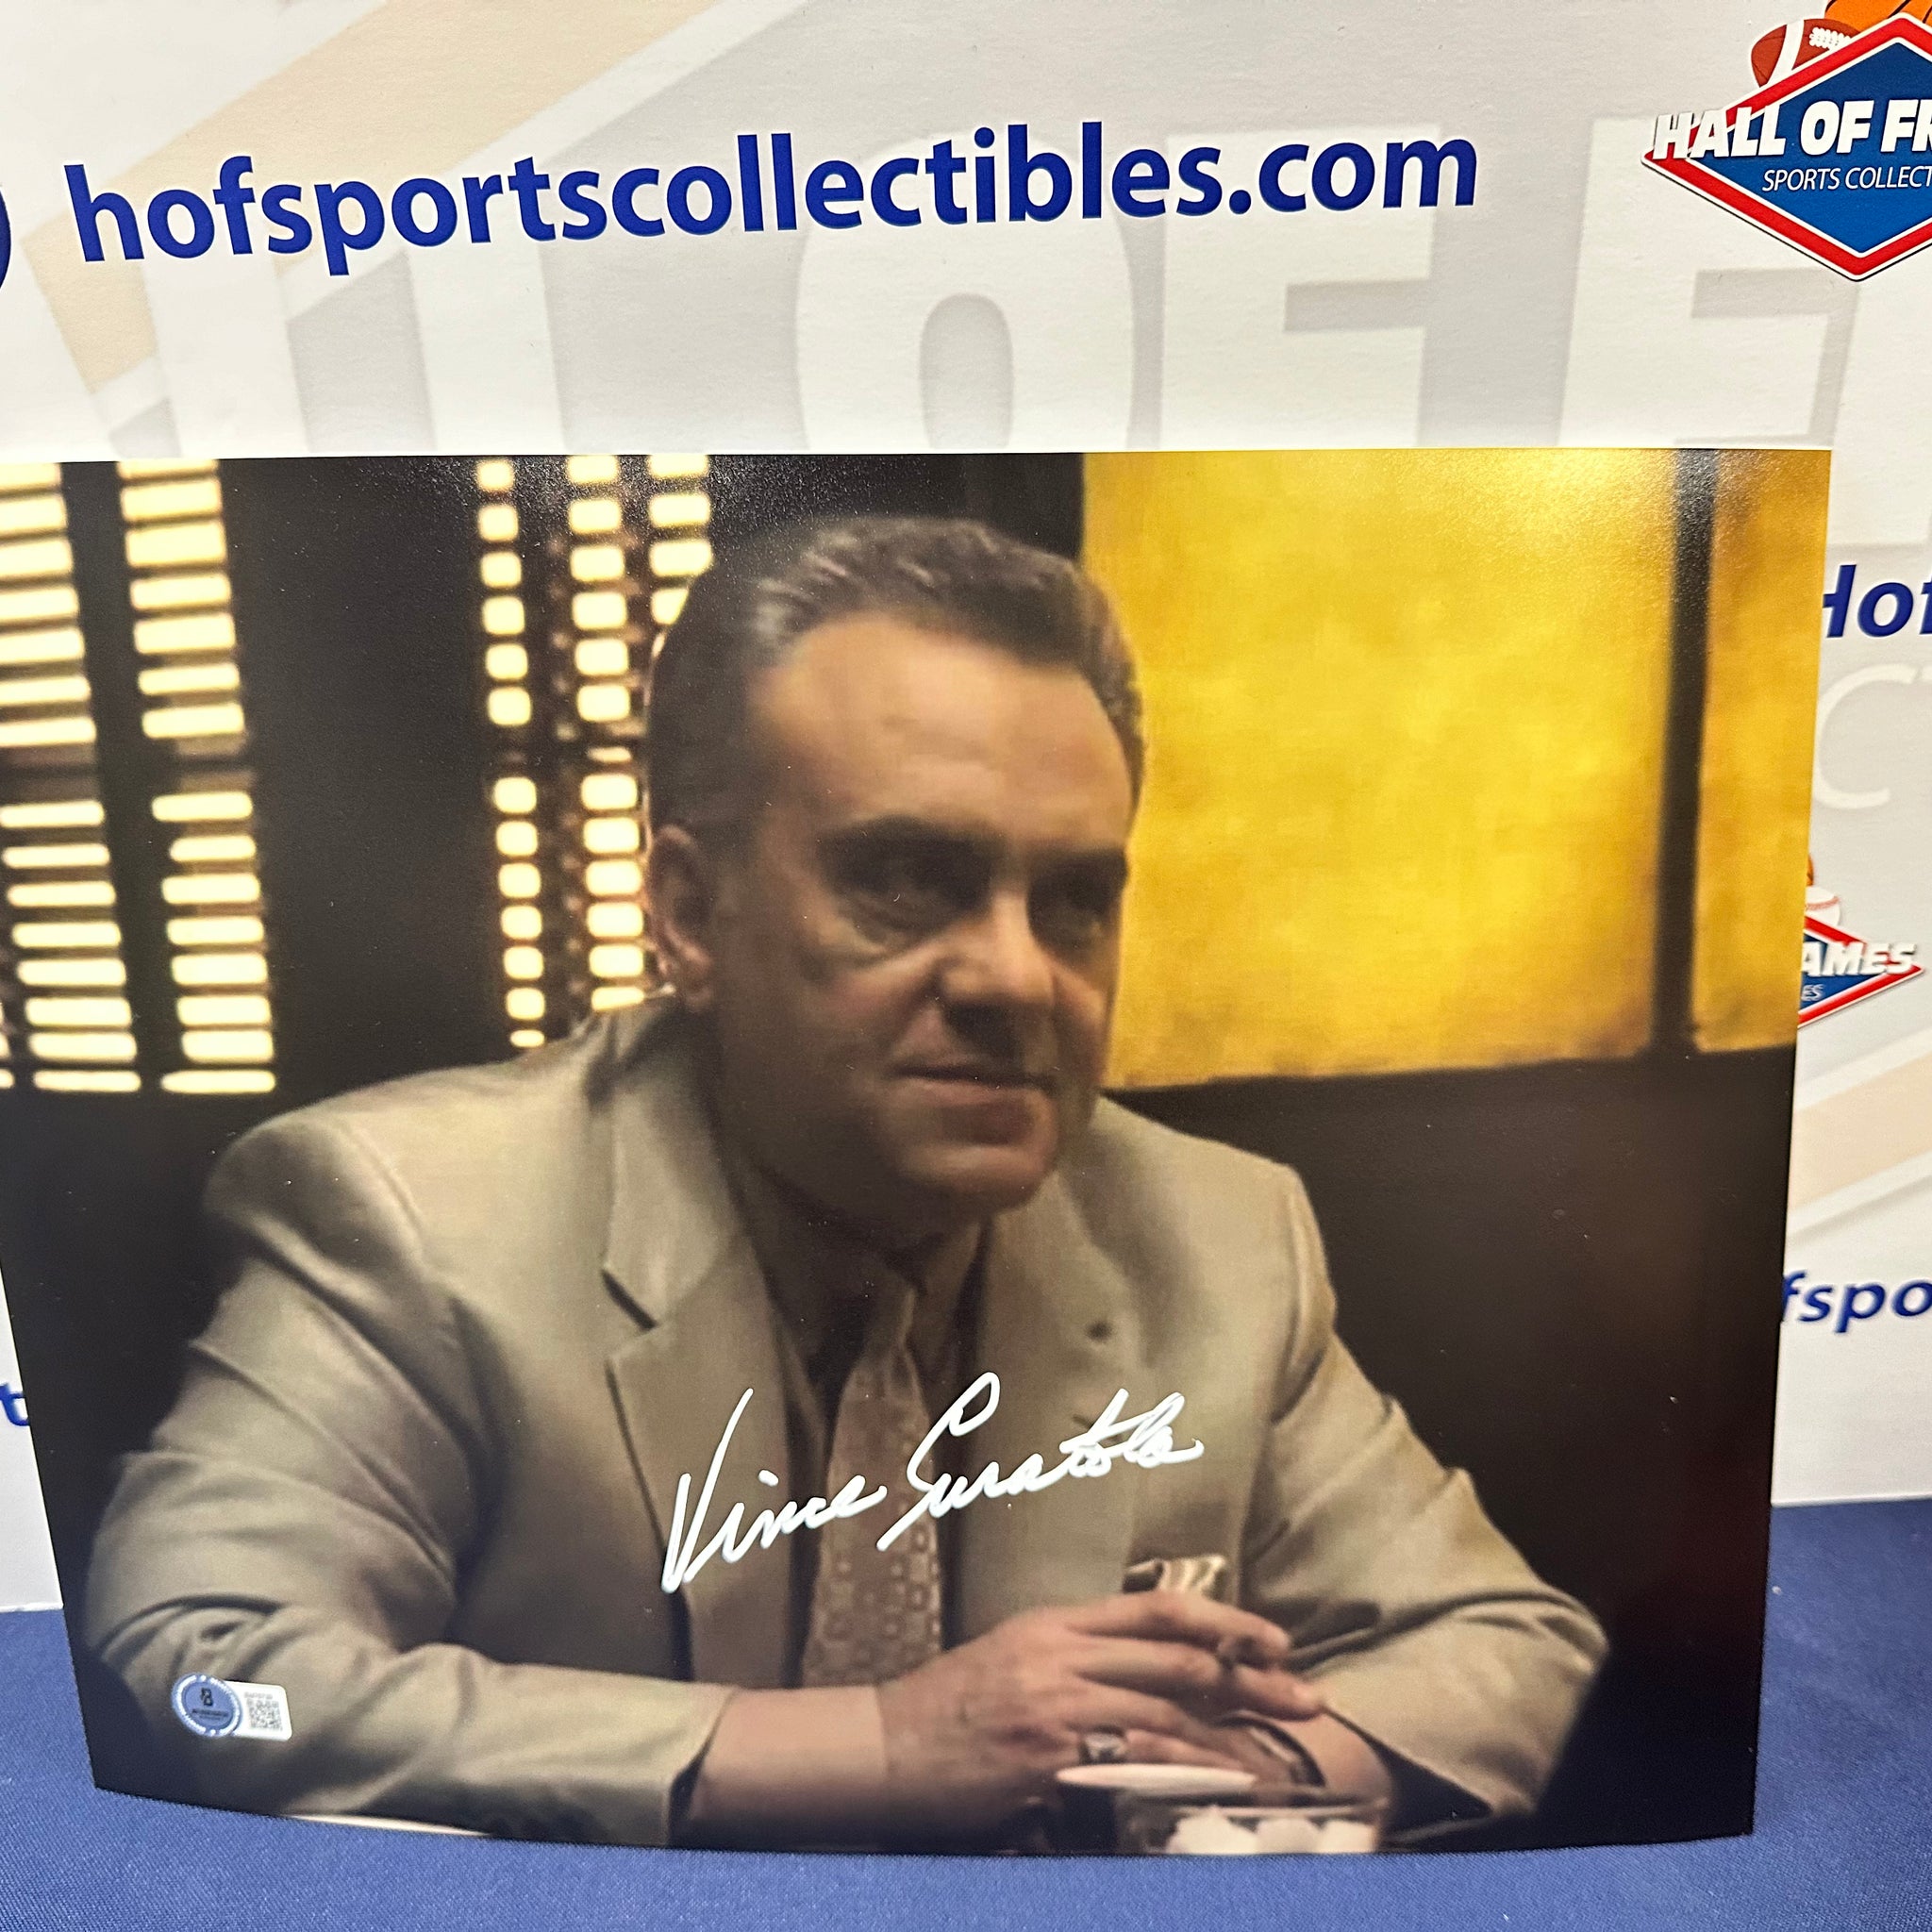 VINCENT CURATOLA "THE SOPRANOS" "JOHNNY SACK" SIGNED 11X14! BAS AUTHENTIC!